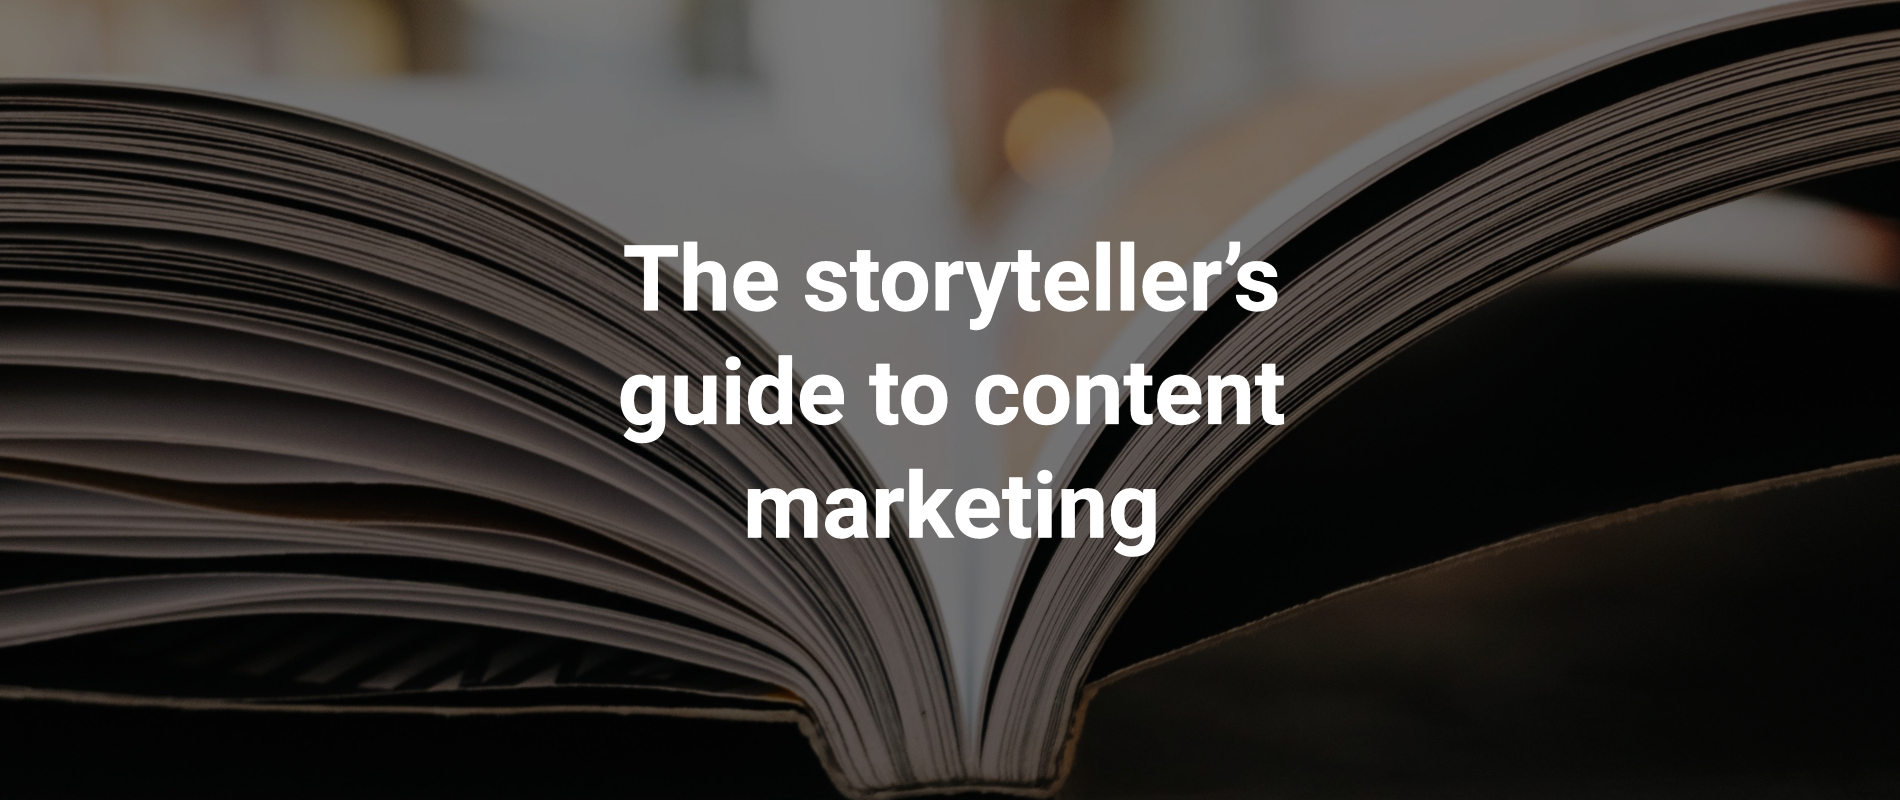 The storyteller’s guide to content marketing